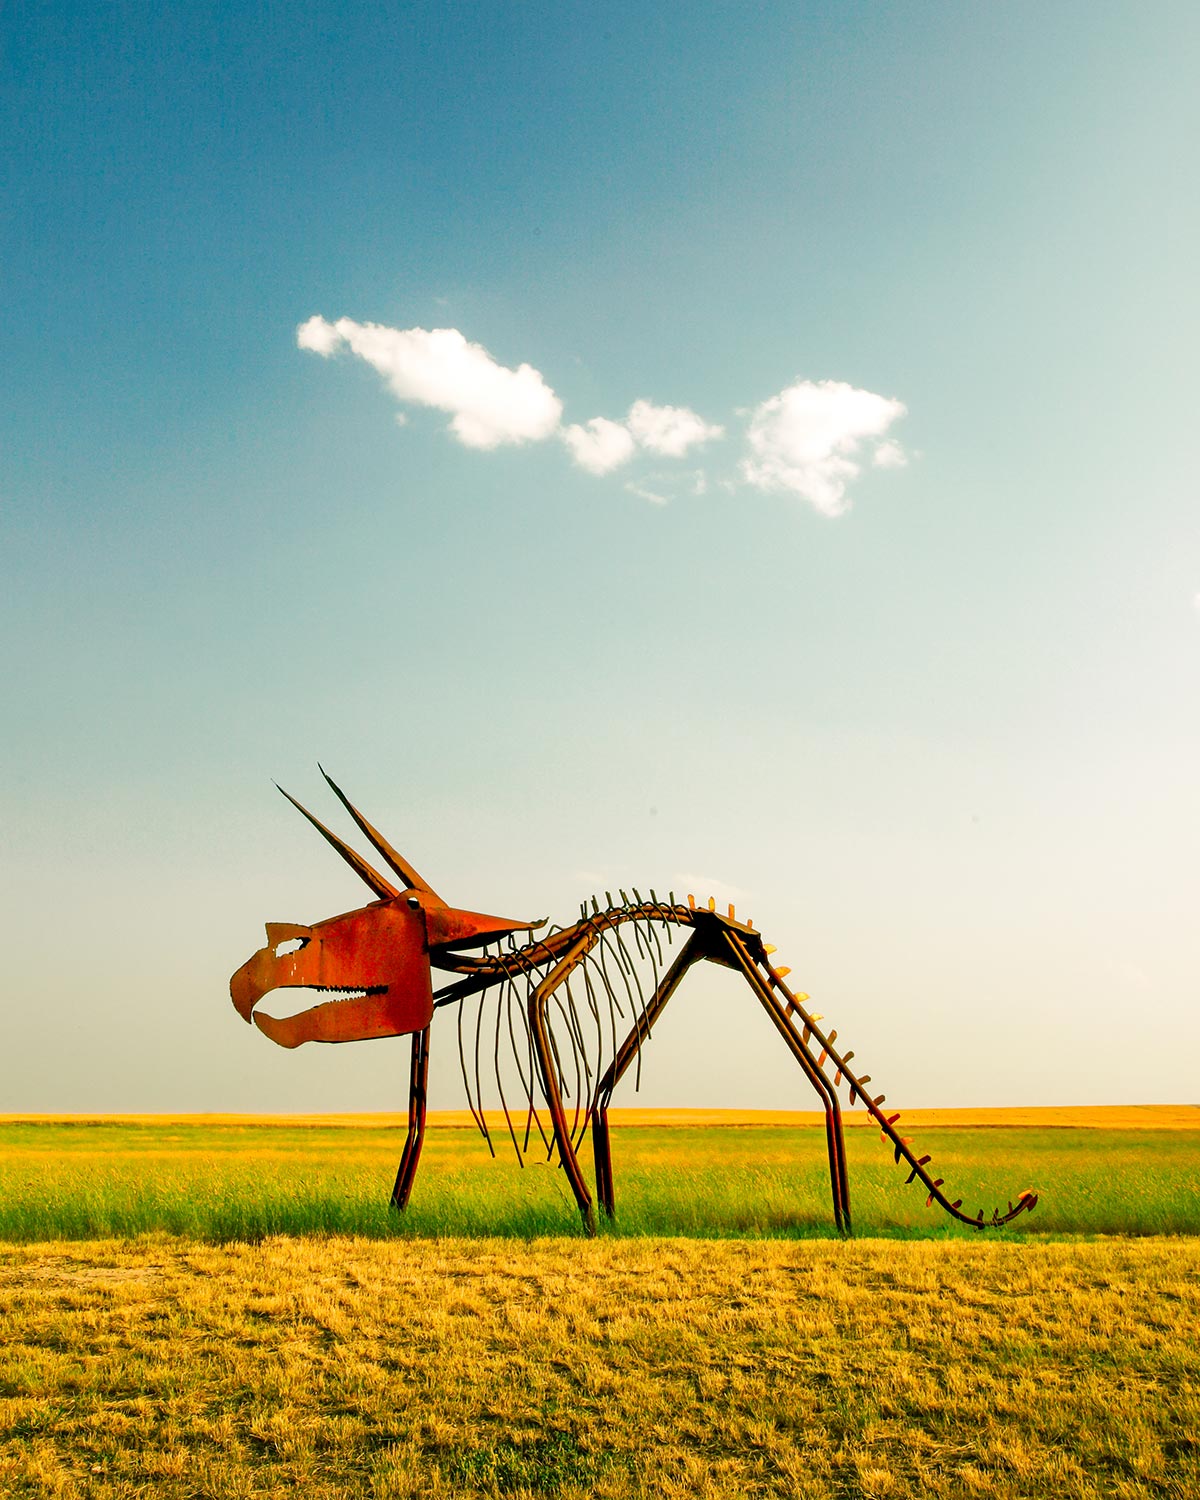 A metal sculpture in the form of a Triceratops dinosaur is an excellent example of rural Montana folk art. It can be found on the south side of U.S.&nbsp;→ Buy a Print&nbsp;or License Photo